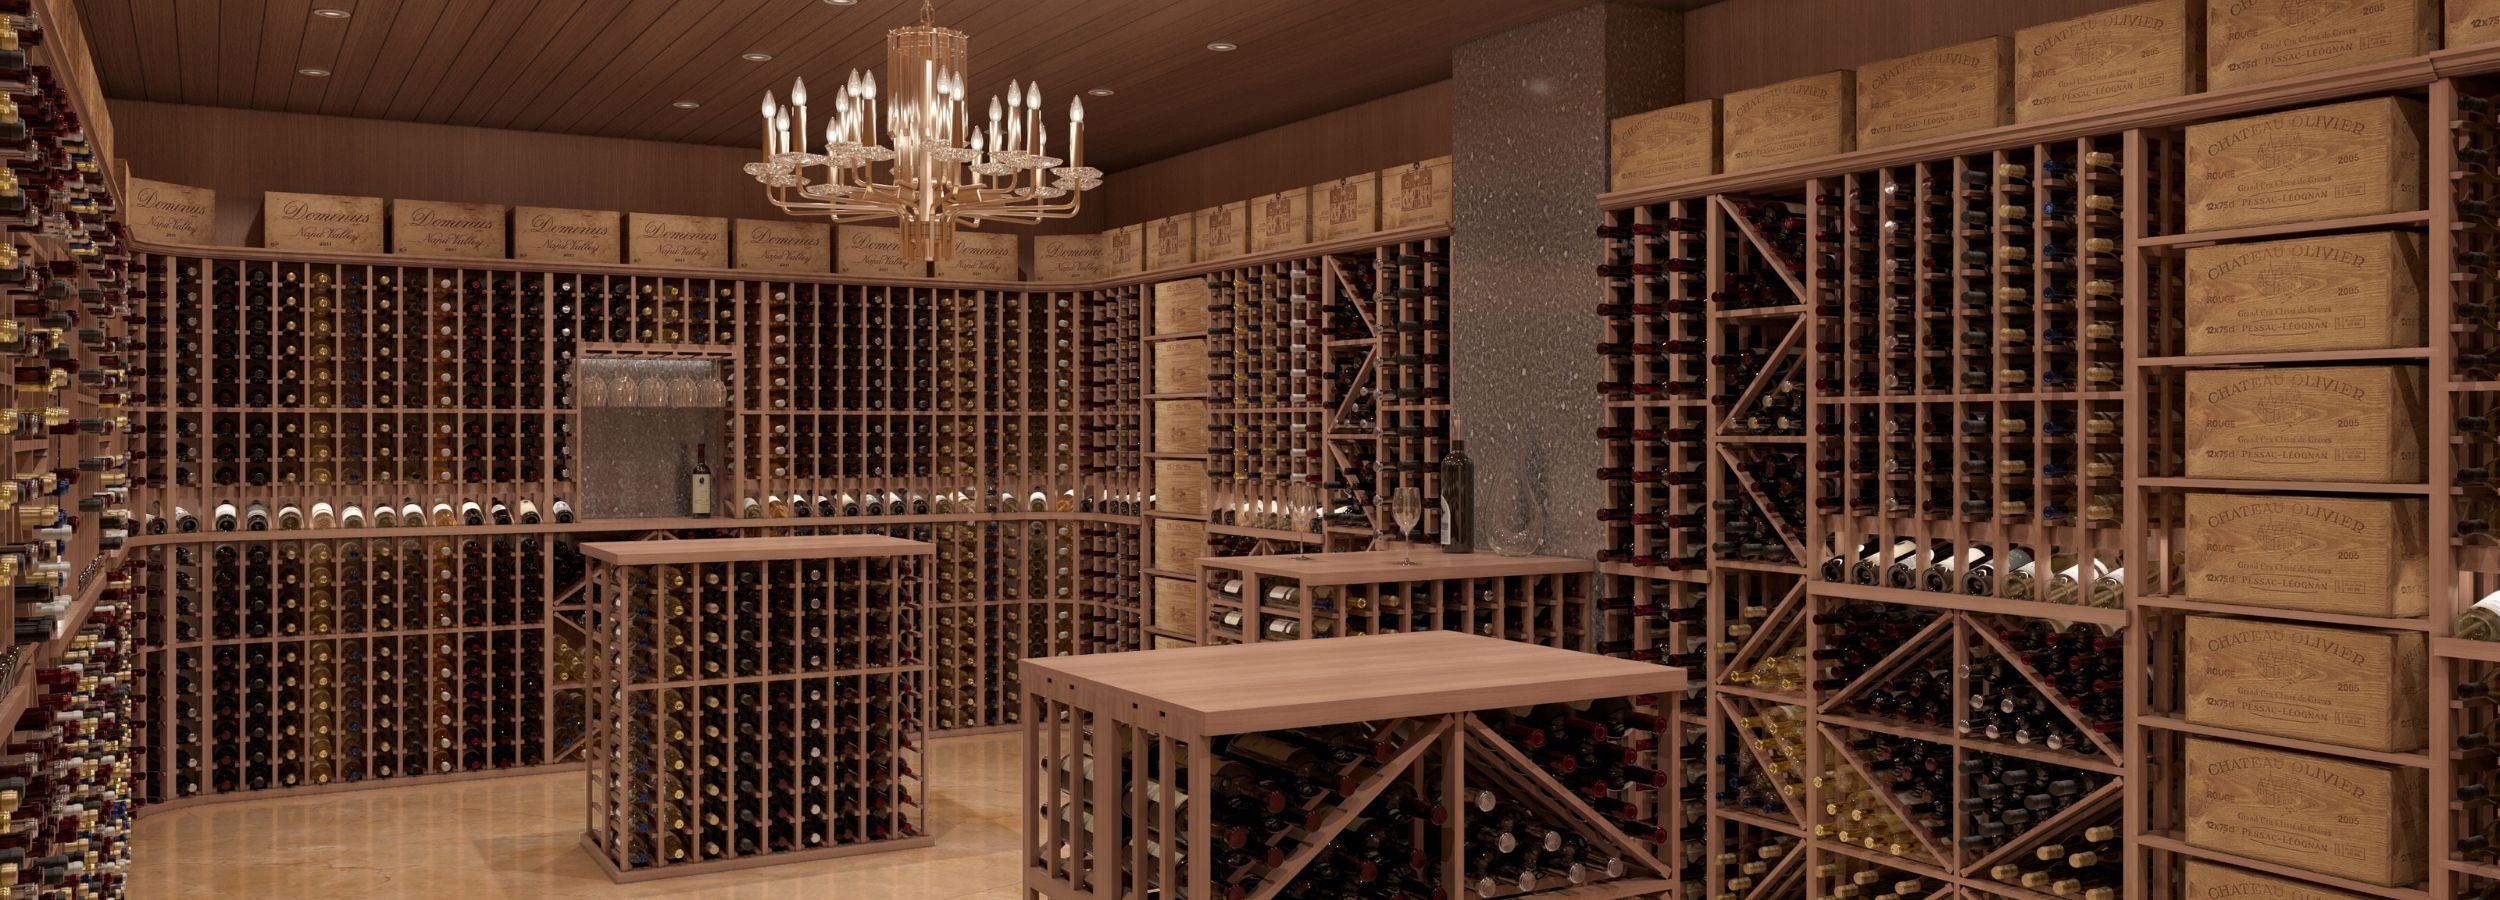 Maximizing Your Wine Collection with a Traditional Wine Cellar Design